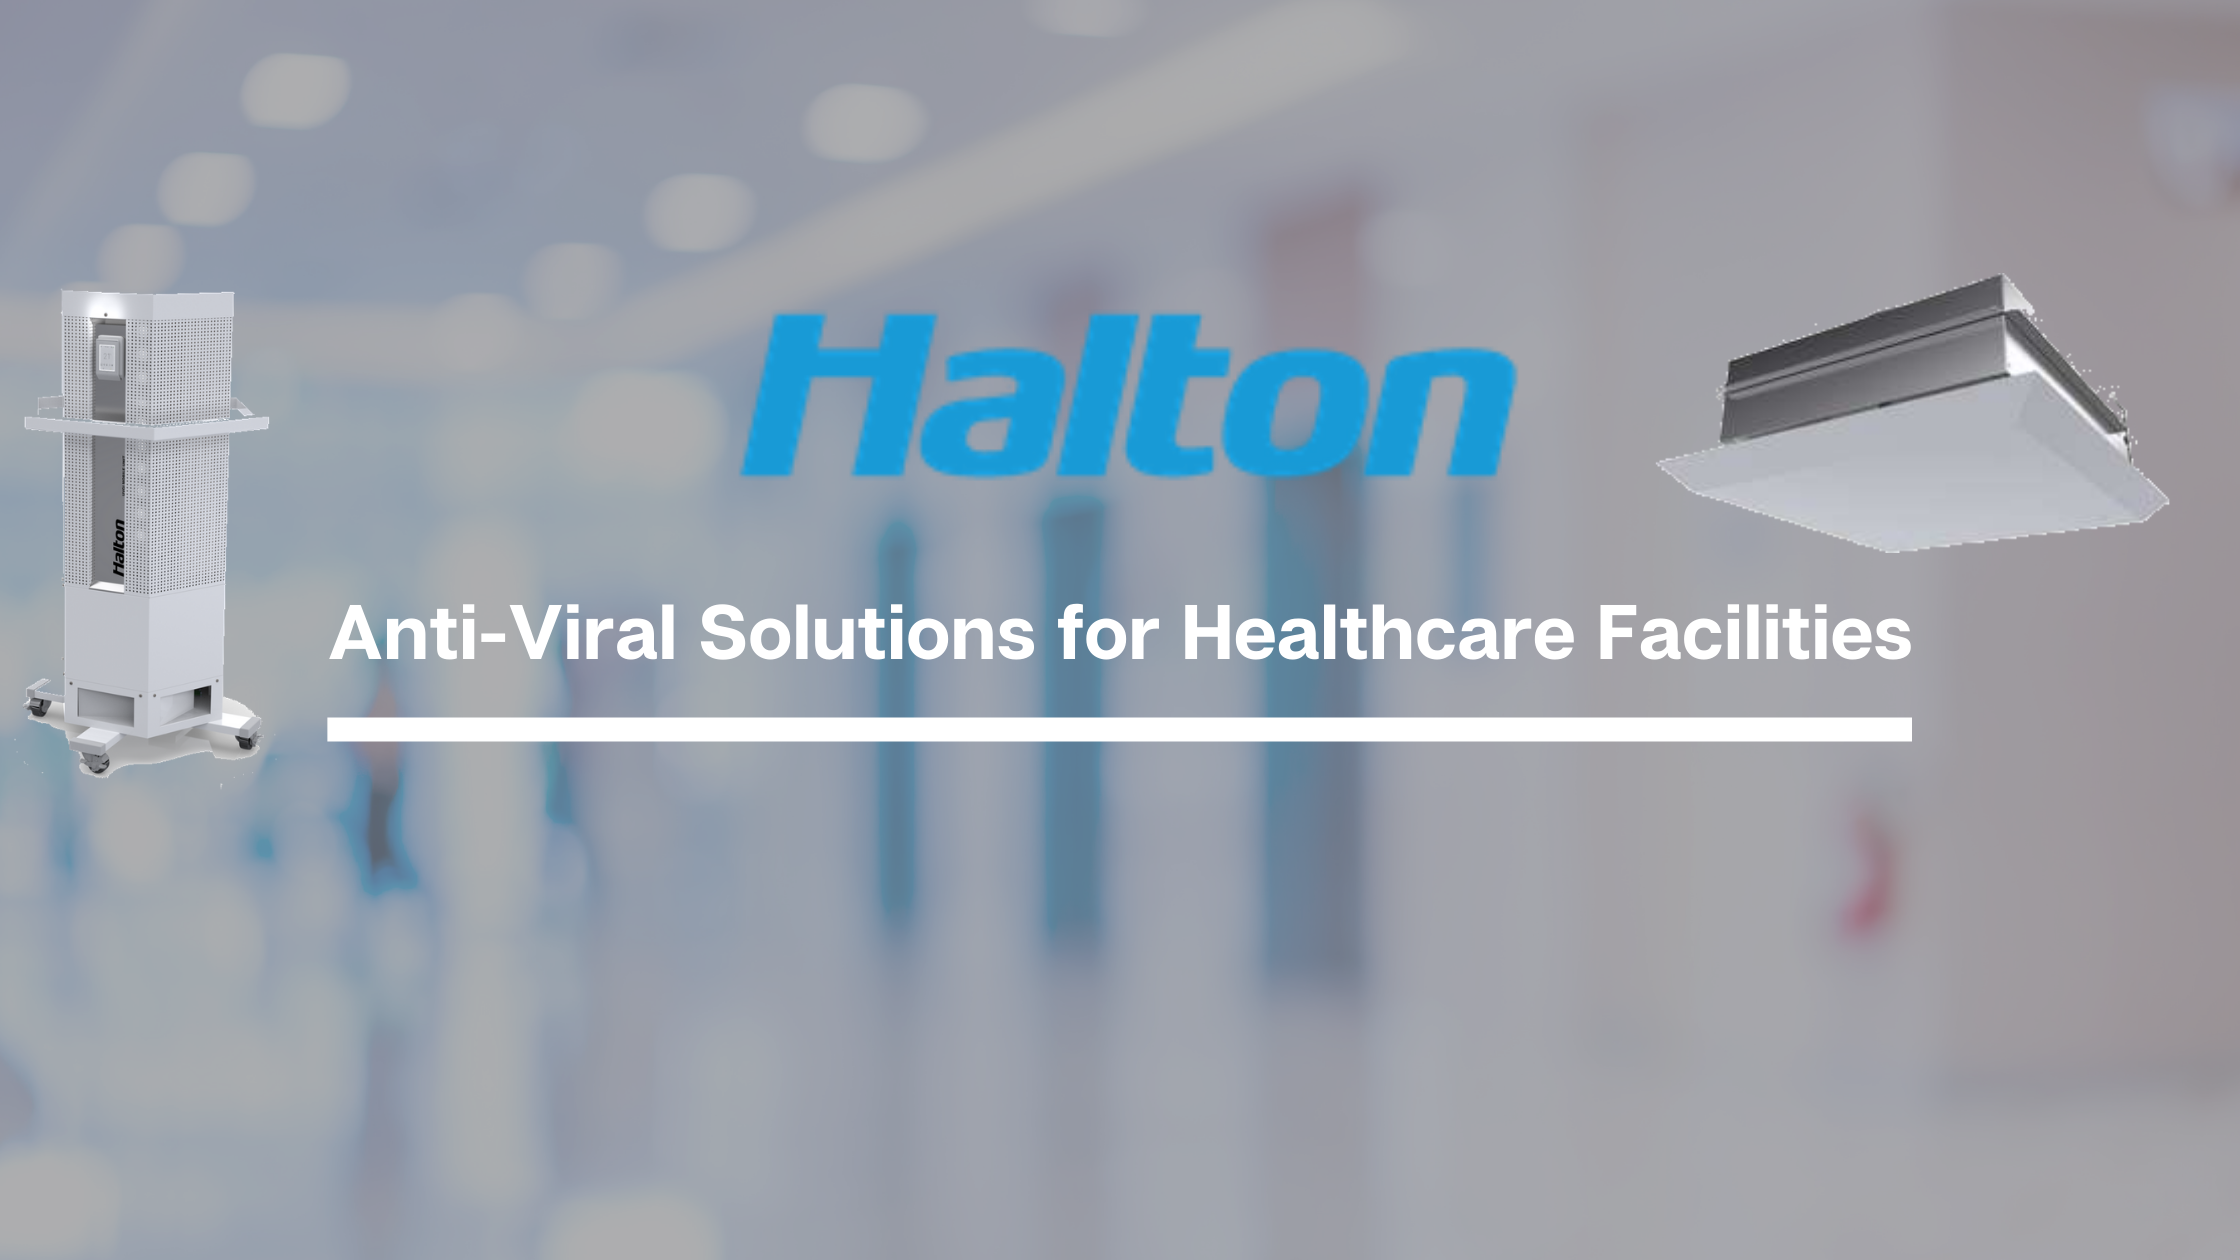 Anti-Viral Solutions for Healthcare Facilities